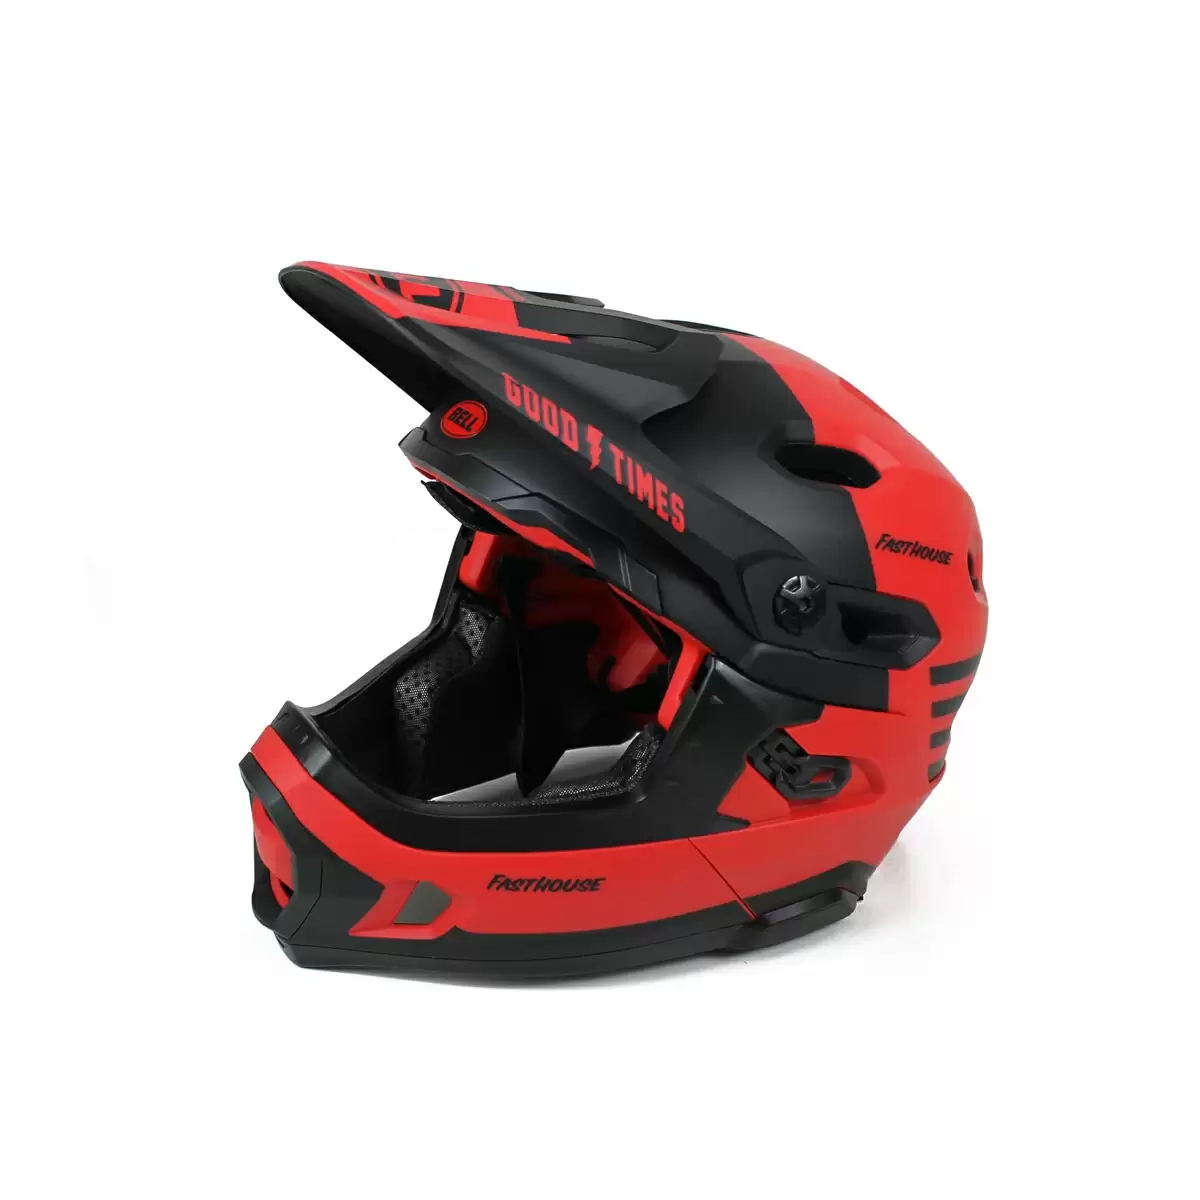 Helmet Super DH MIPS Fasthouse Red Size S (52-56cm) #1